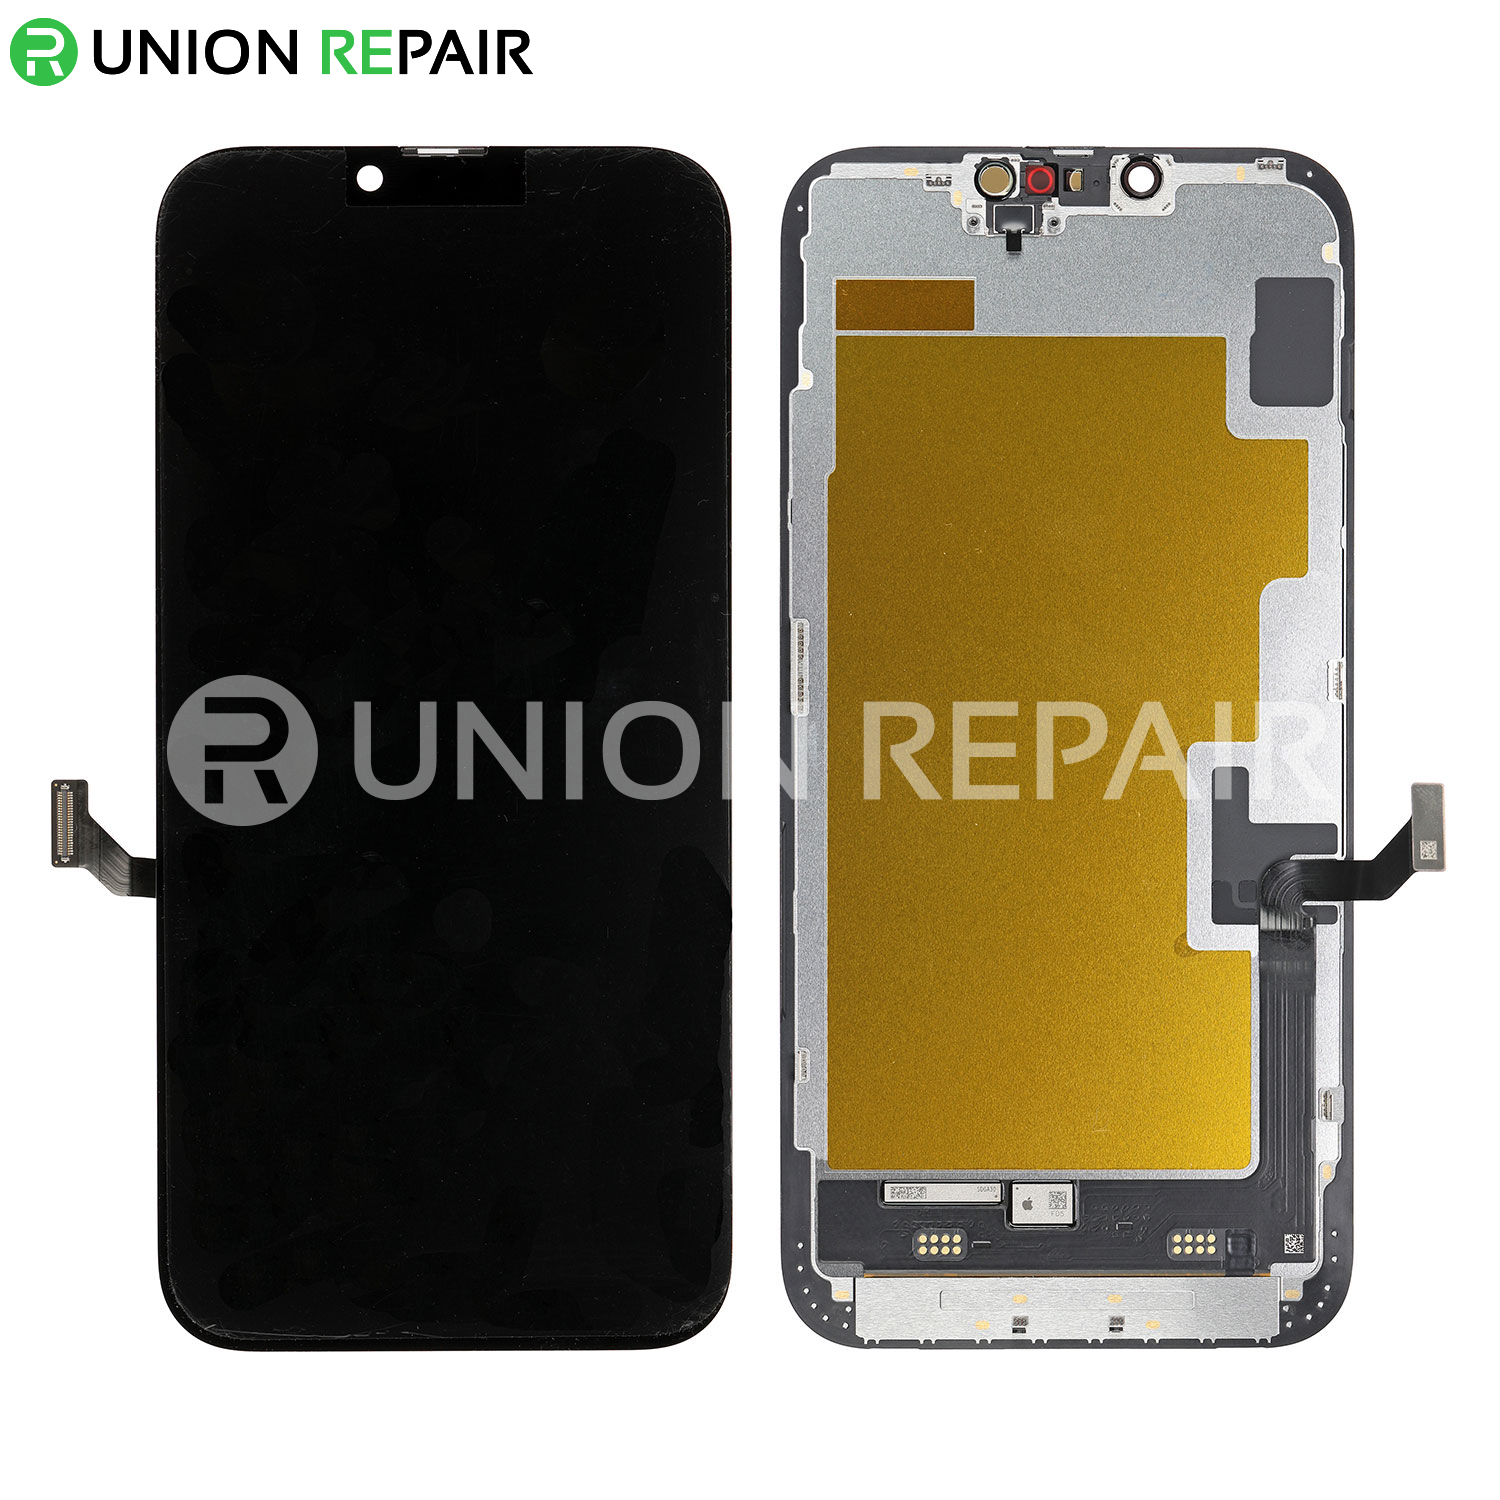 China iPhone 11 PRO Max Original OLED Display Touch Screen Panel Digitizer  Replacement Mobile Phone LCD Manufacturer and Supplier